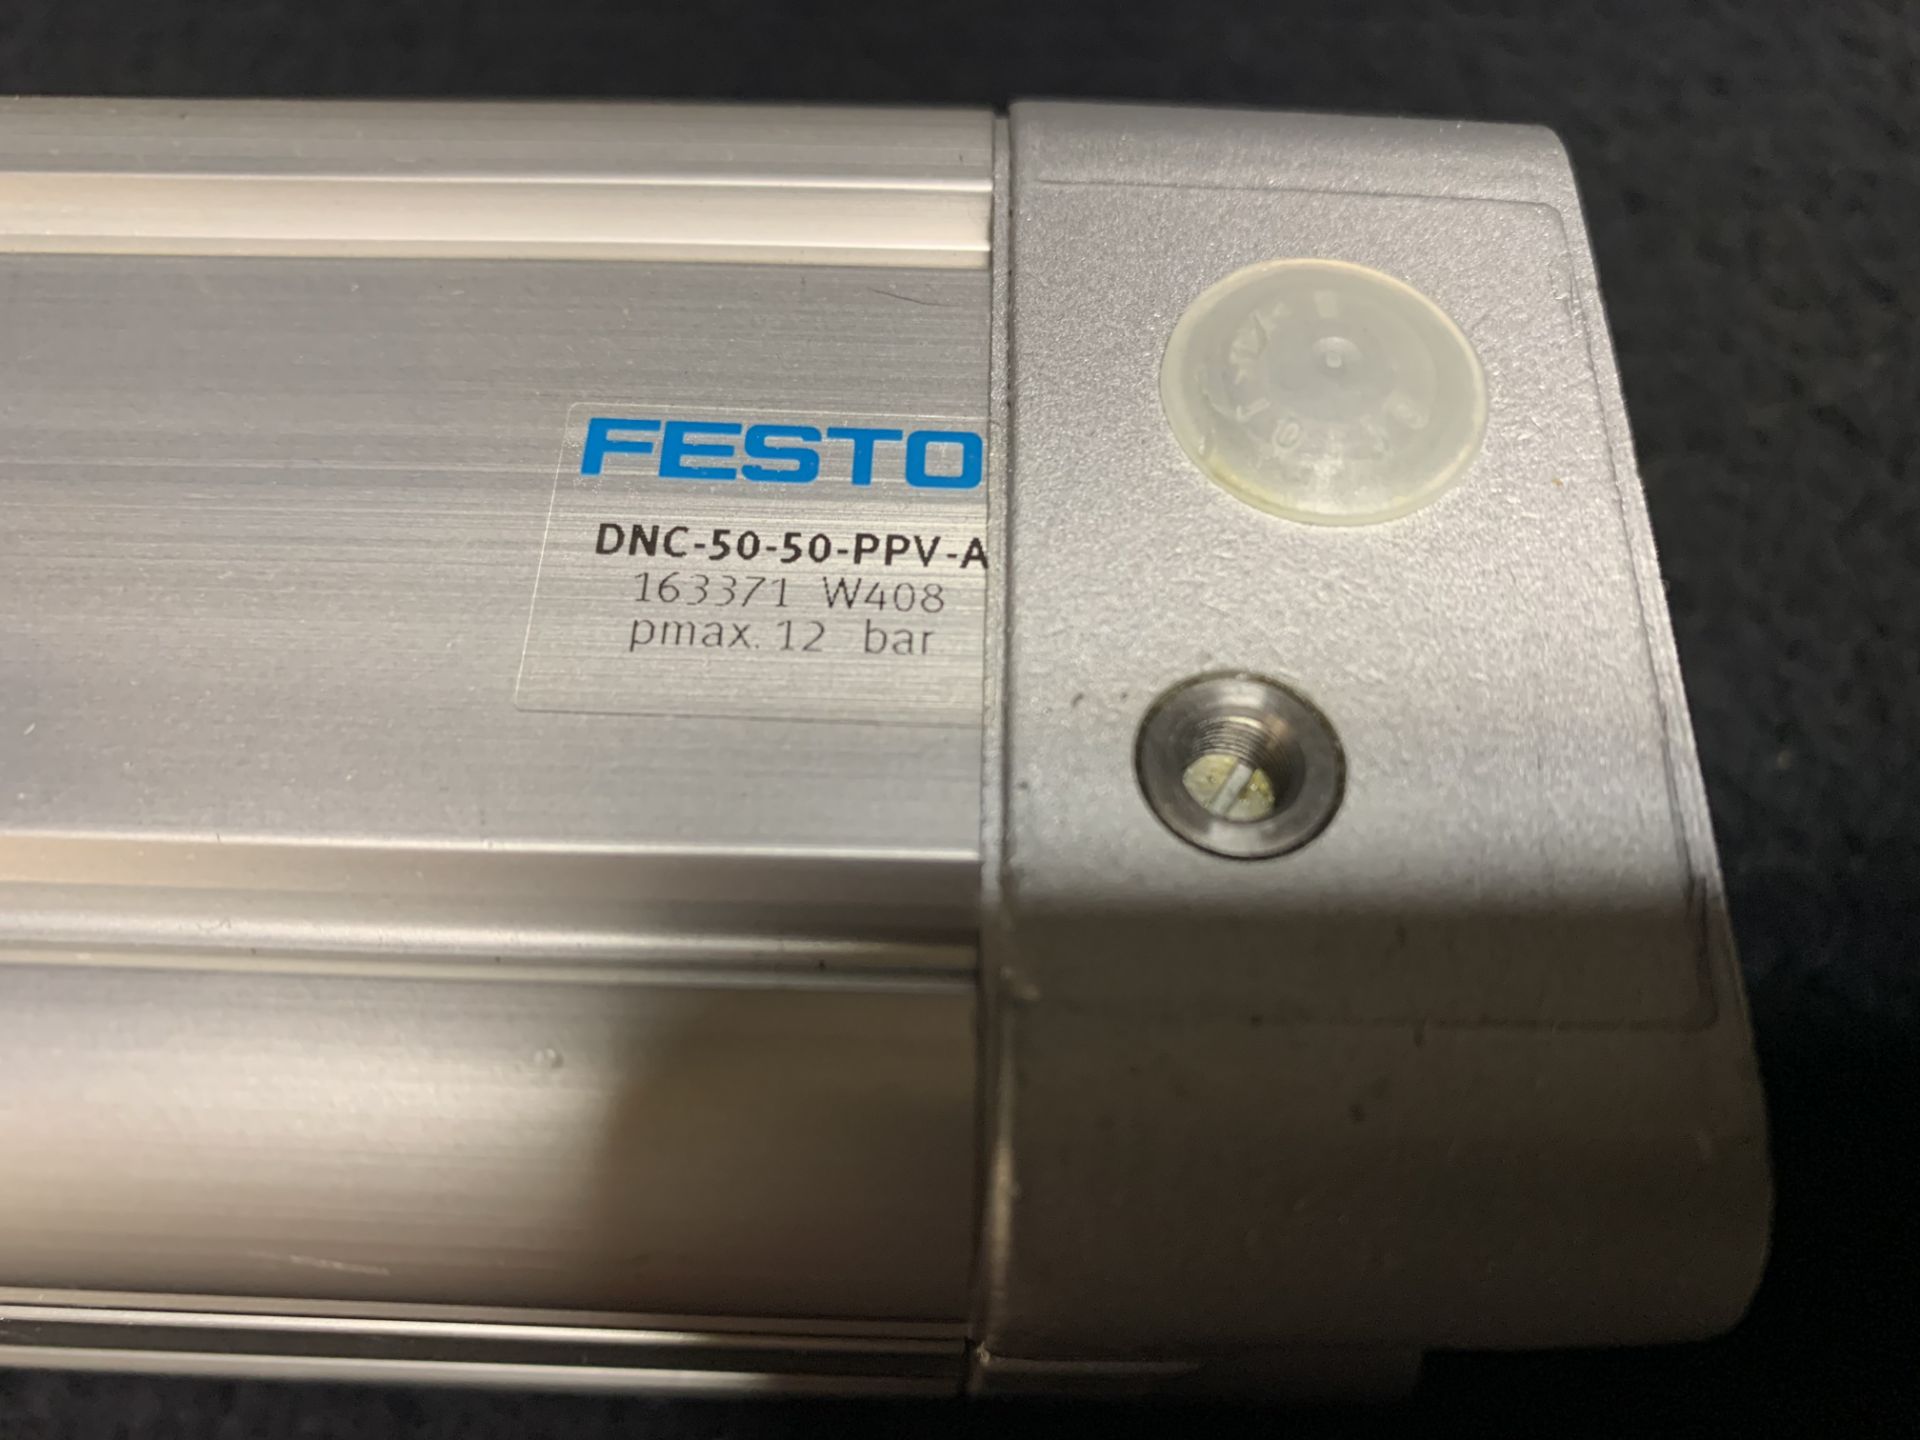 FESTO DNC-50-50-PPV-A DOUBLE-ACTING CYLINDER, BORE SIZE 50MM, STROKE LENGTH 50MM,PNEUMATIC CUSHIONIN - Image 2 of 4